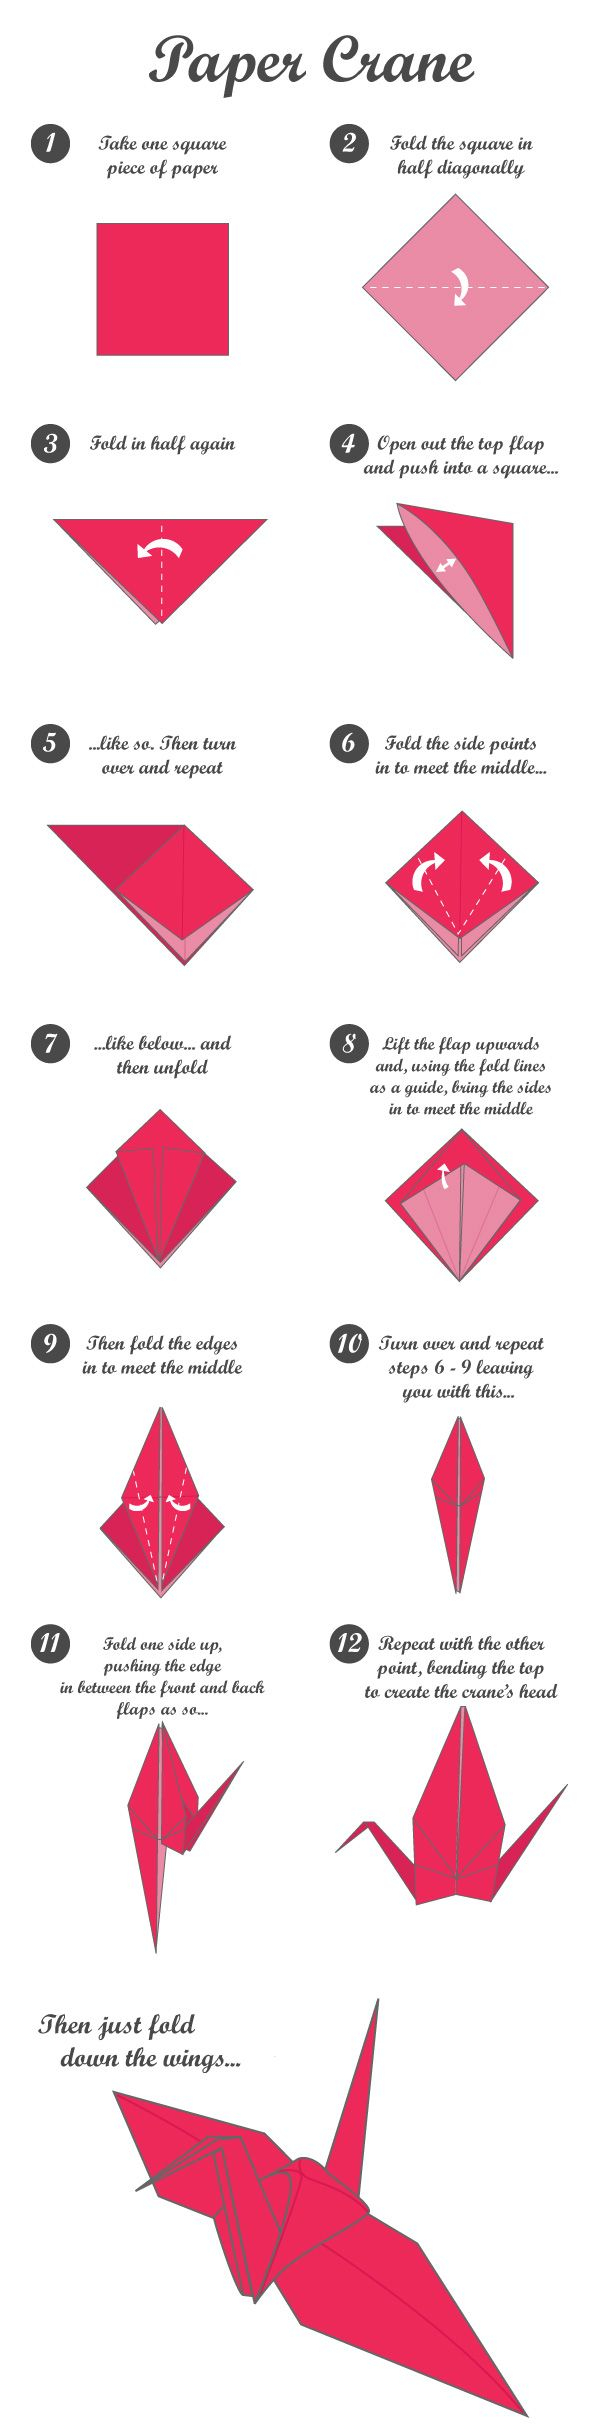 Origami Crane Directions How To Make An Origami Crane That Flaps Its Wings Origami Crane